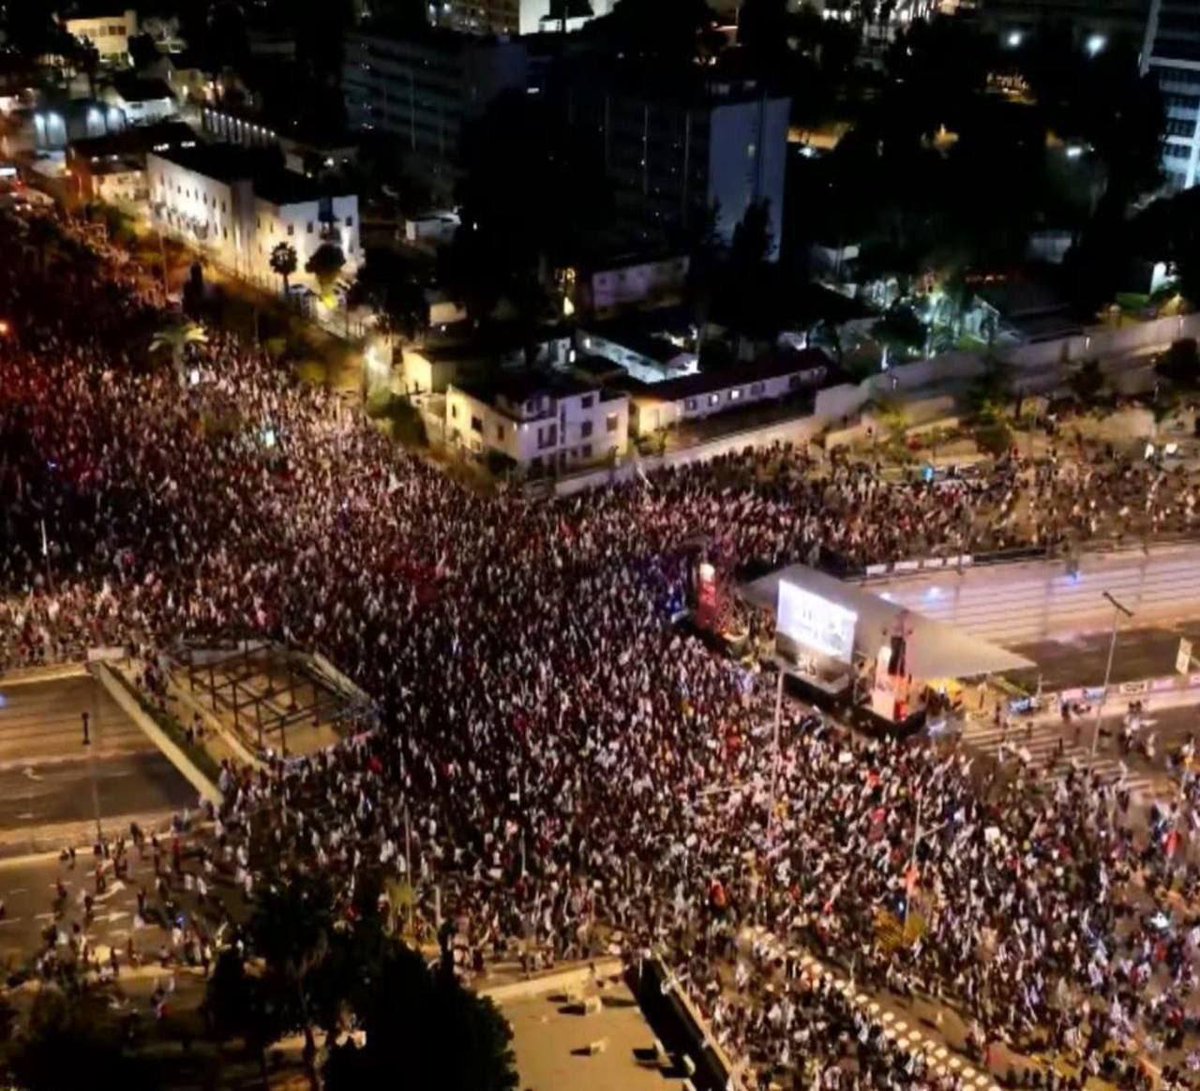 🇮🇱The problems for Netanyahu are expanding Thousands of Israelis demonstrate in Tel Aviv to demand an exchange deal and the overthrow of Netanyahu’s rule.